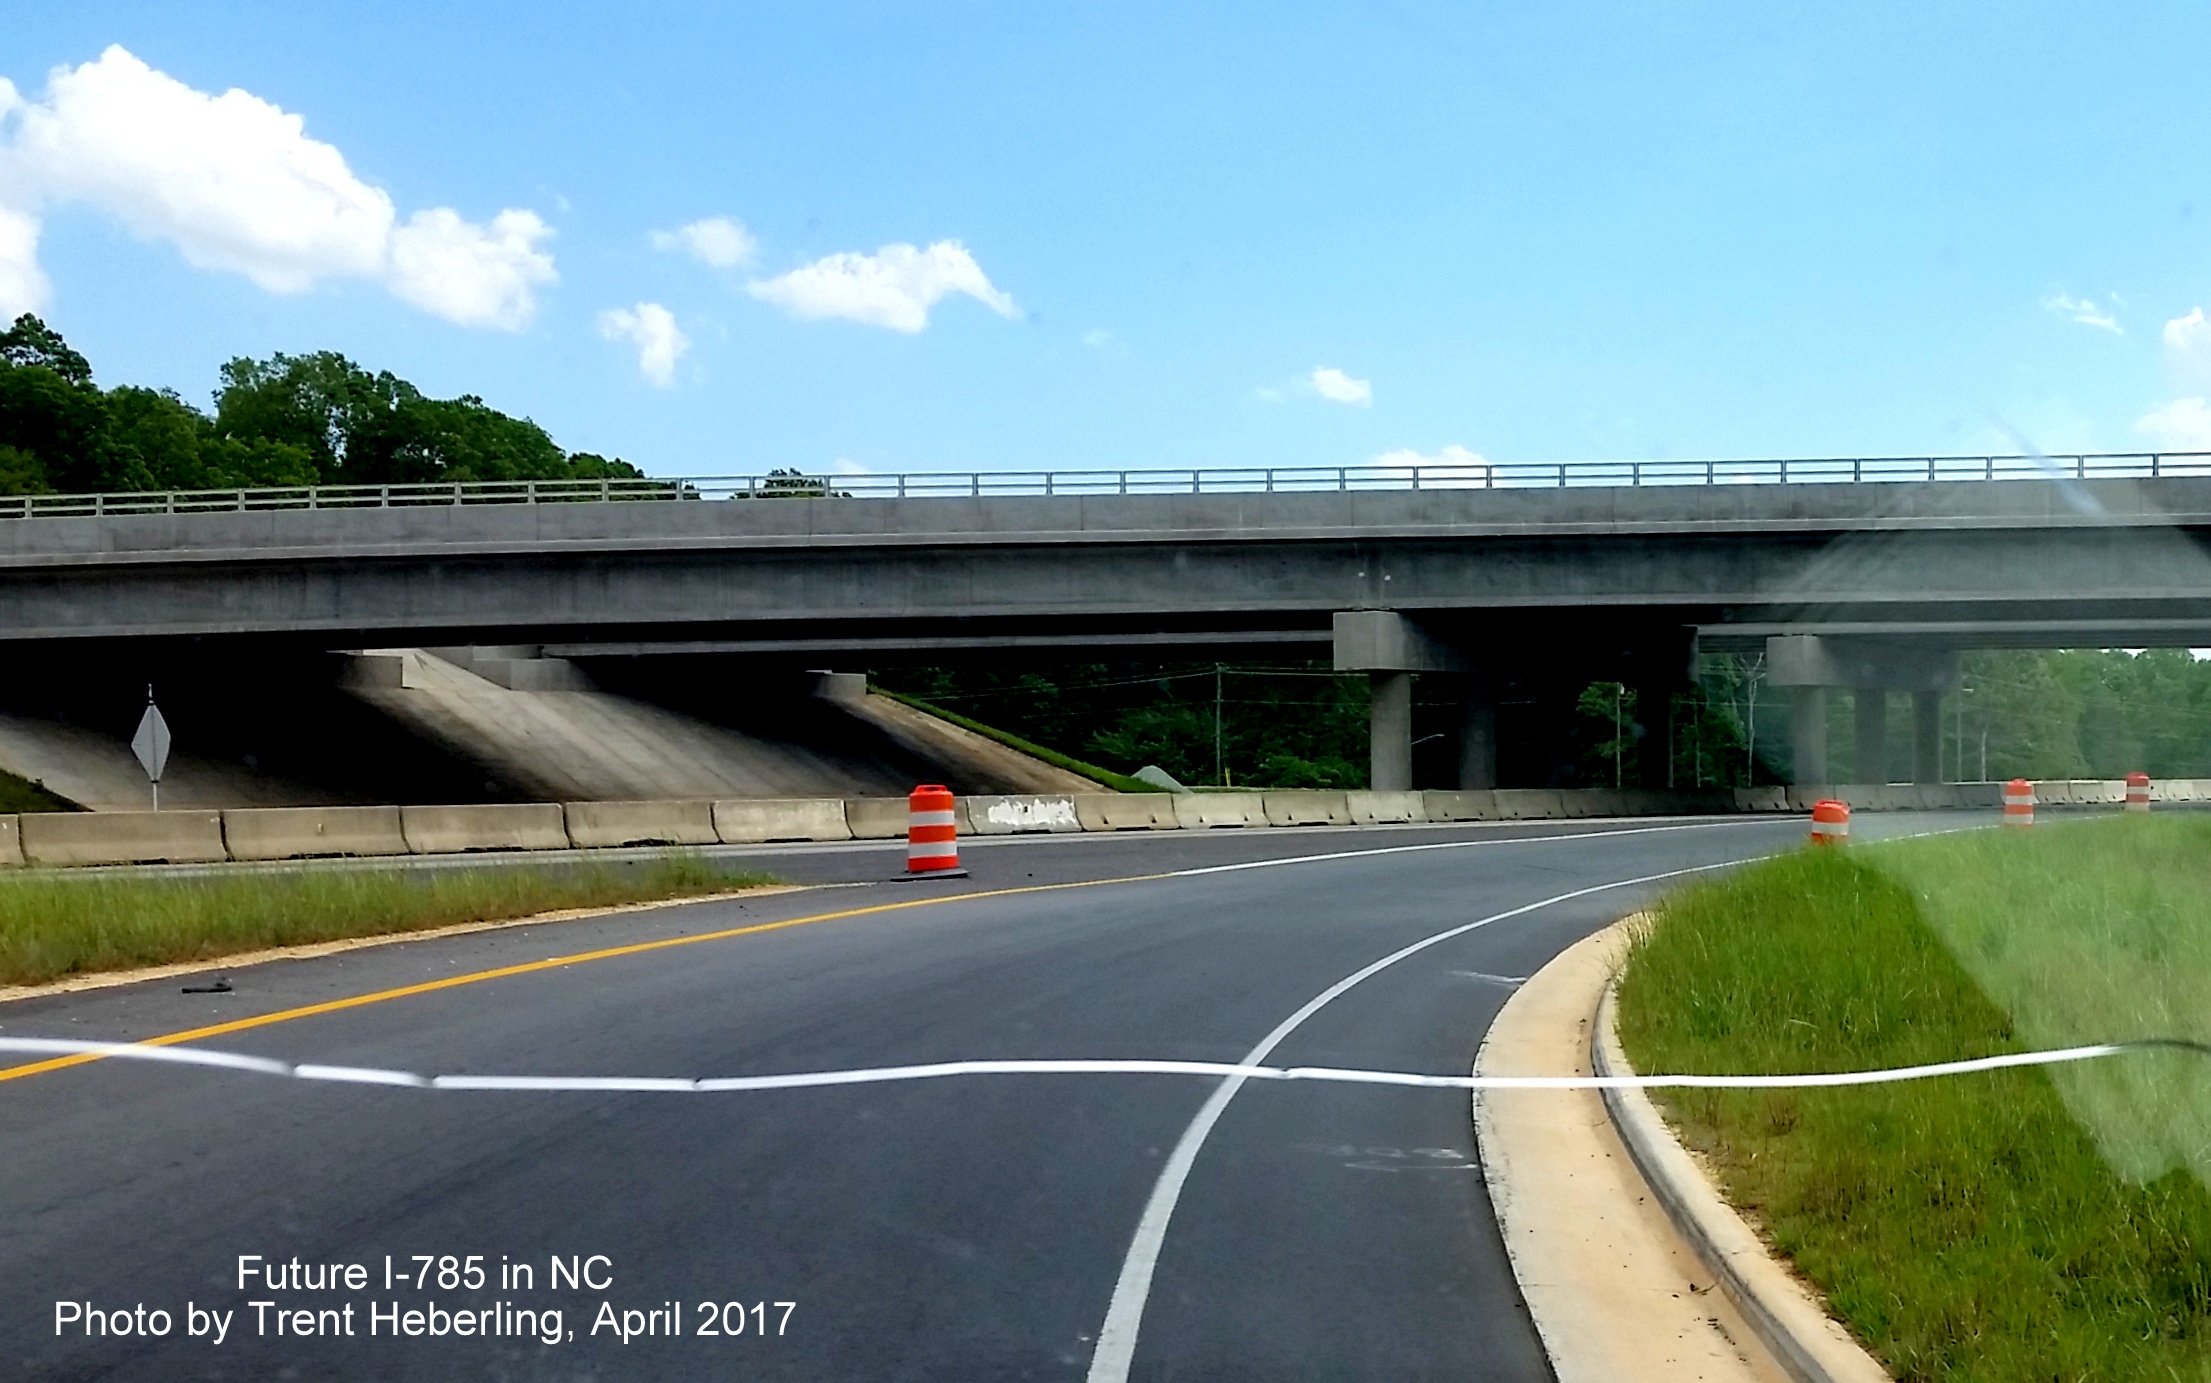 Image taken along ramp from Hicone Road to US 29 South heading under new bridge constructed as part of I-785 Loop project, by Trent Heberling